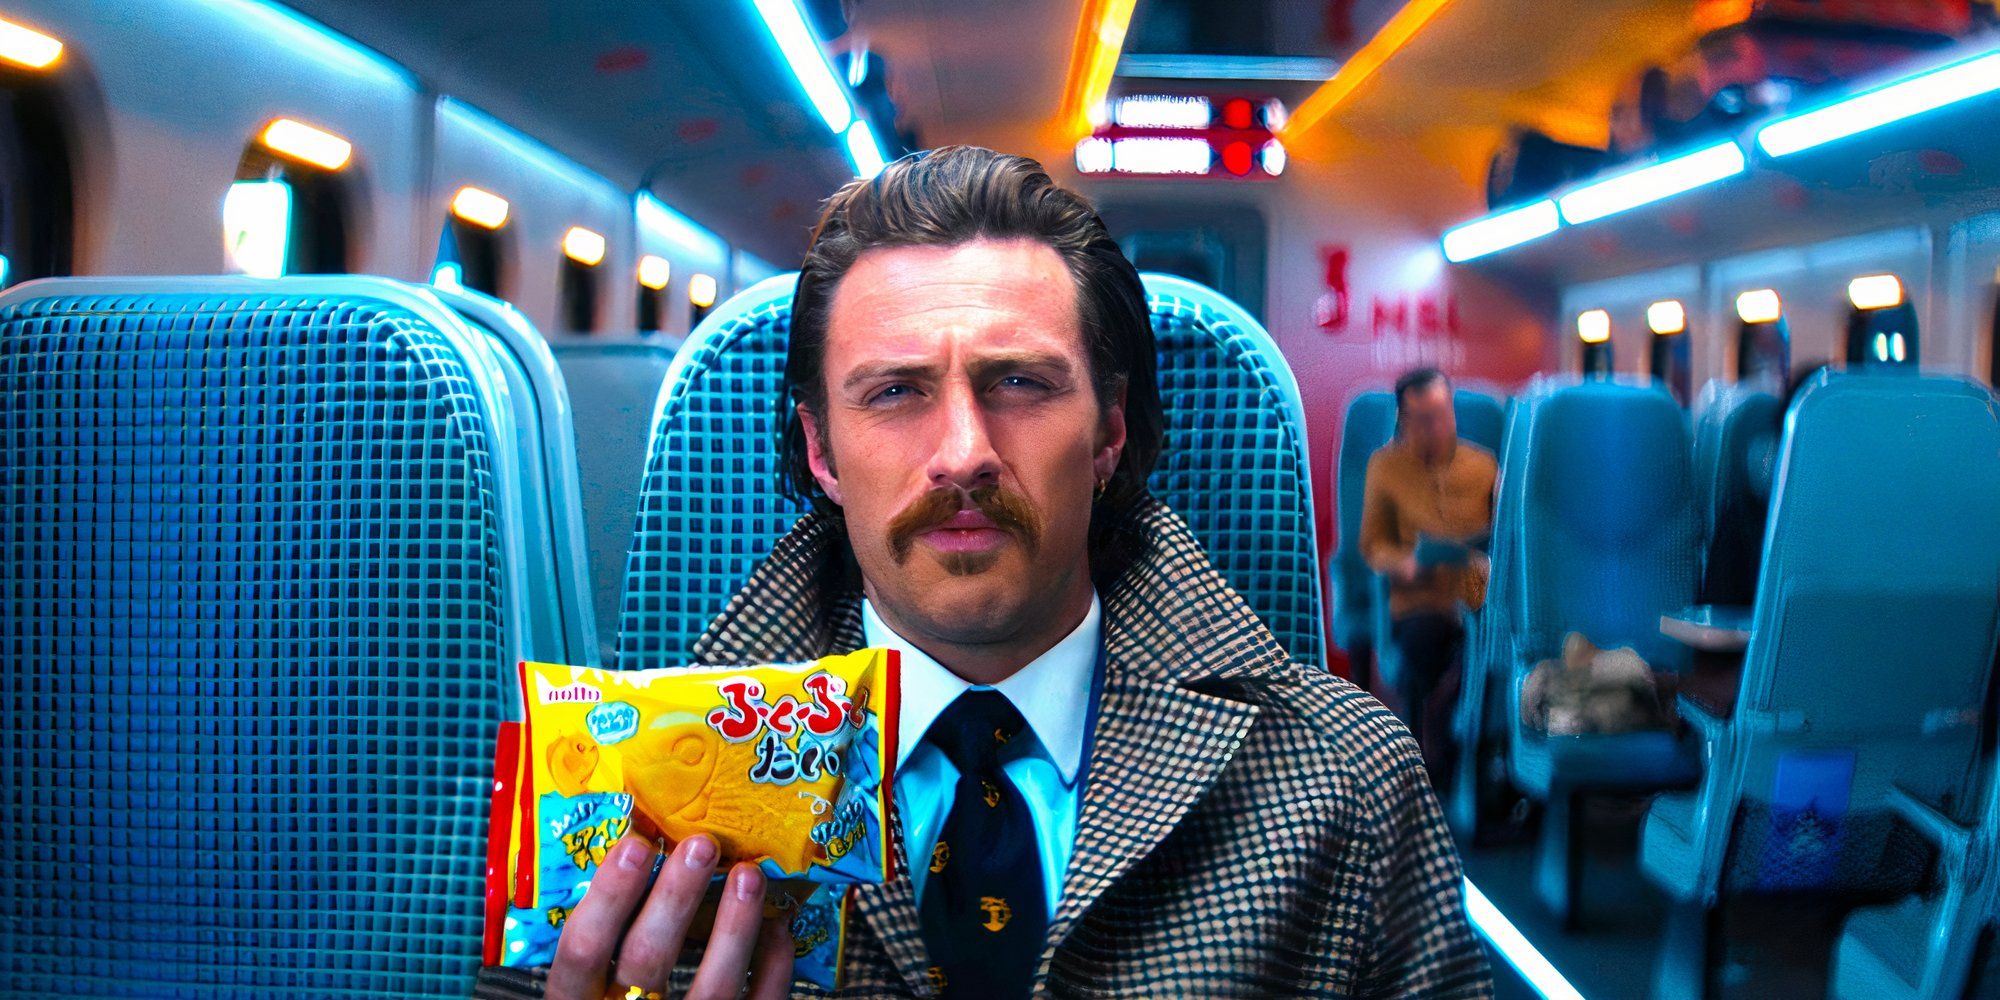 Aaron Taylor-Johnson sits in a train seat holding up a package of noodles while making a skeptical expression in a scene from Bullet Train